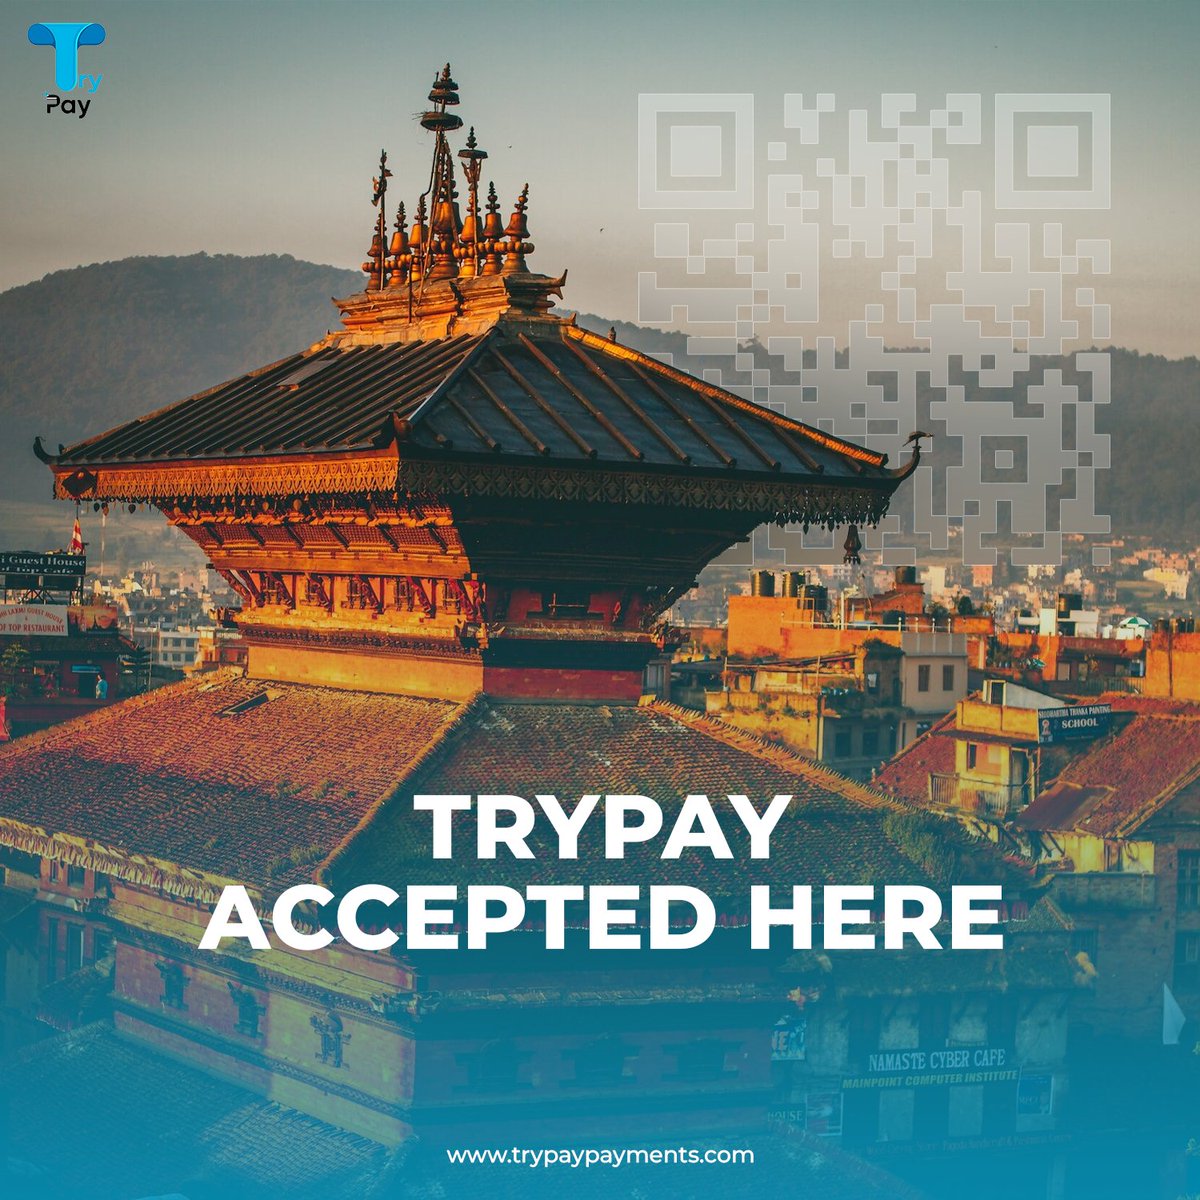 Experience seamless global payments with UPI International on Trypay, making shopping worldwide a breeze!. #GlobalPayments #ConvenienceRedefined #ShopAnywhere #payments #paymentgateway #finance #settlement #paytm #banking